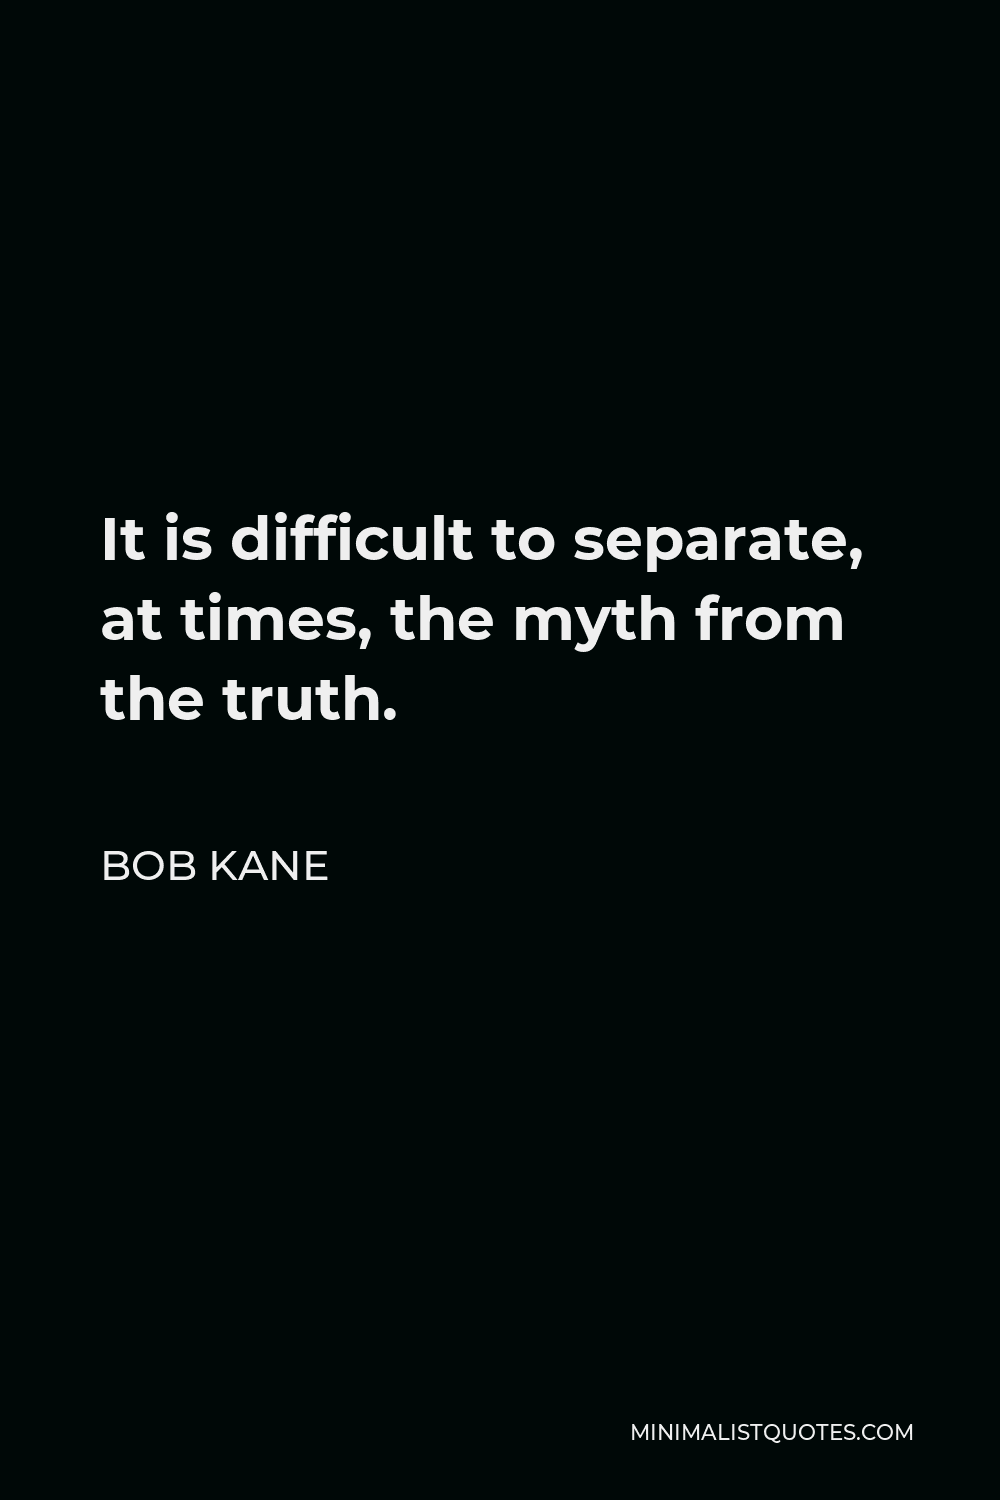 Bob Kane Quote - It is difficult to separate, at times, the myth from the truth.